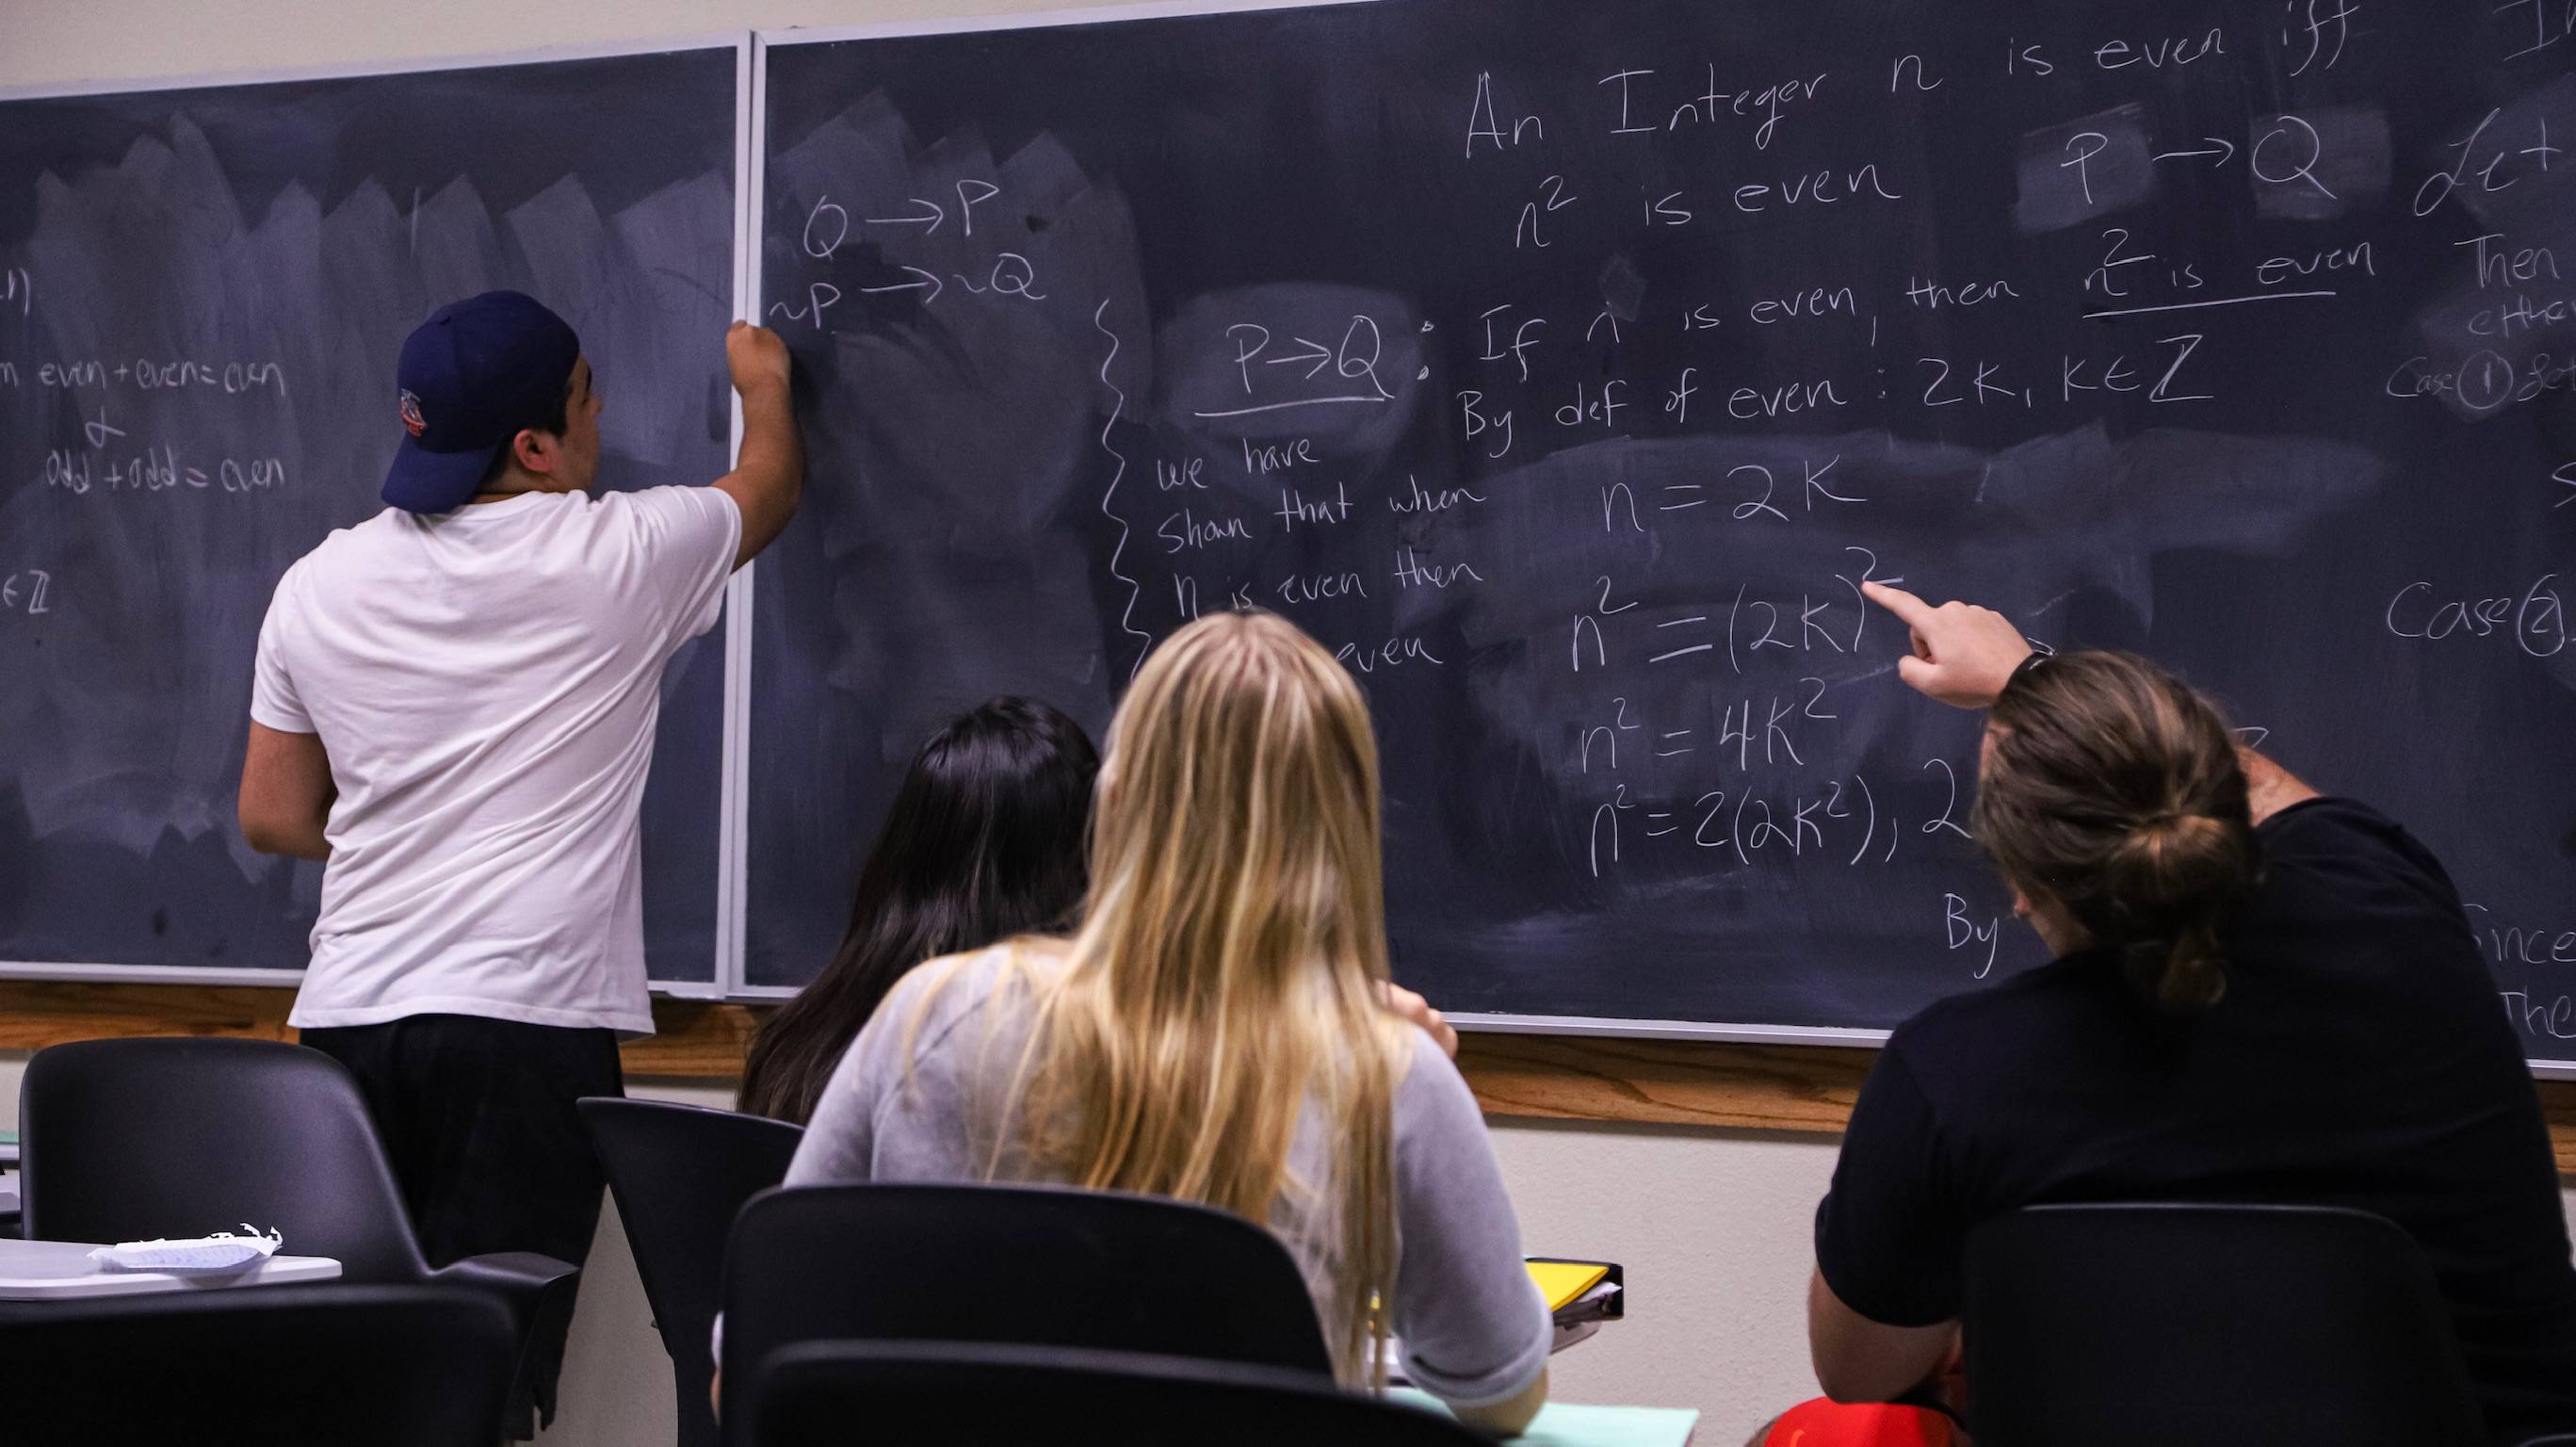 student solving problems at a blackboard